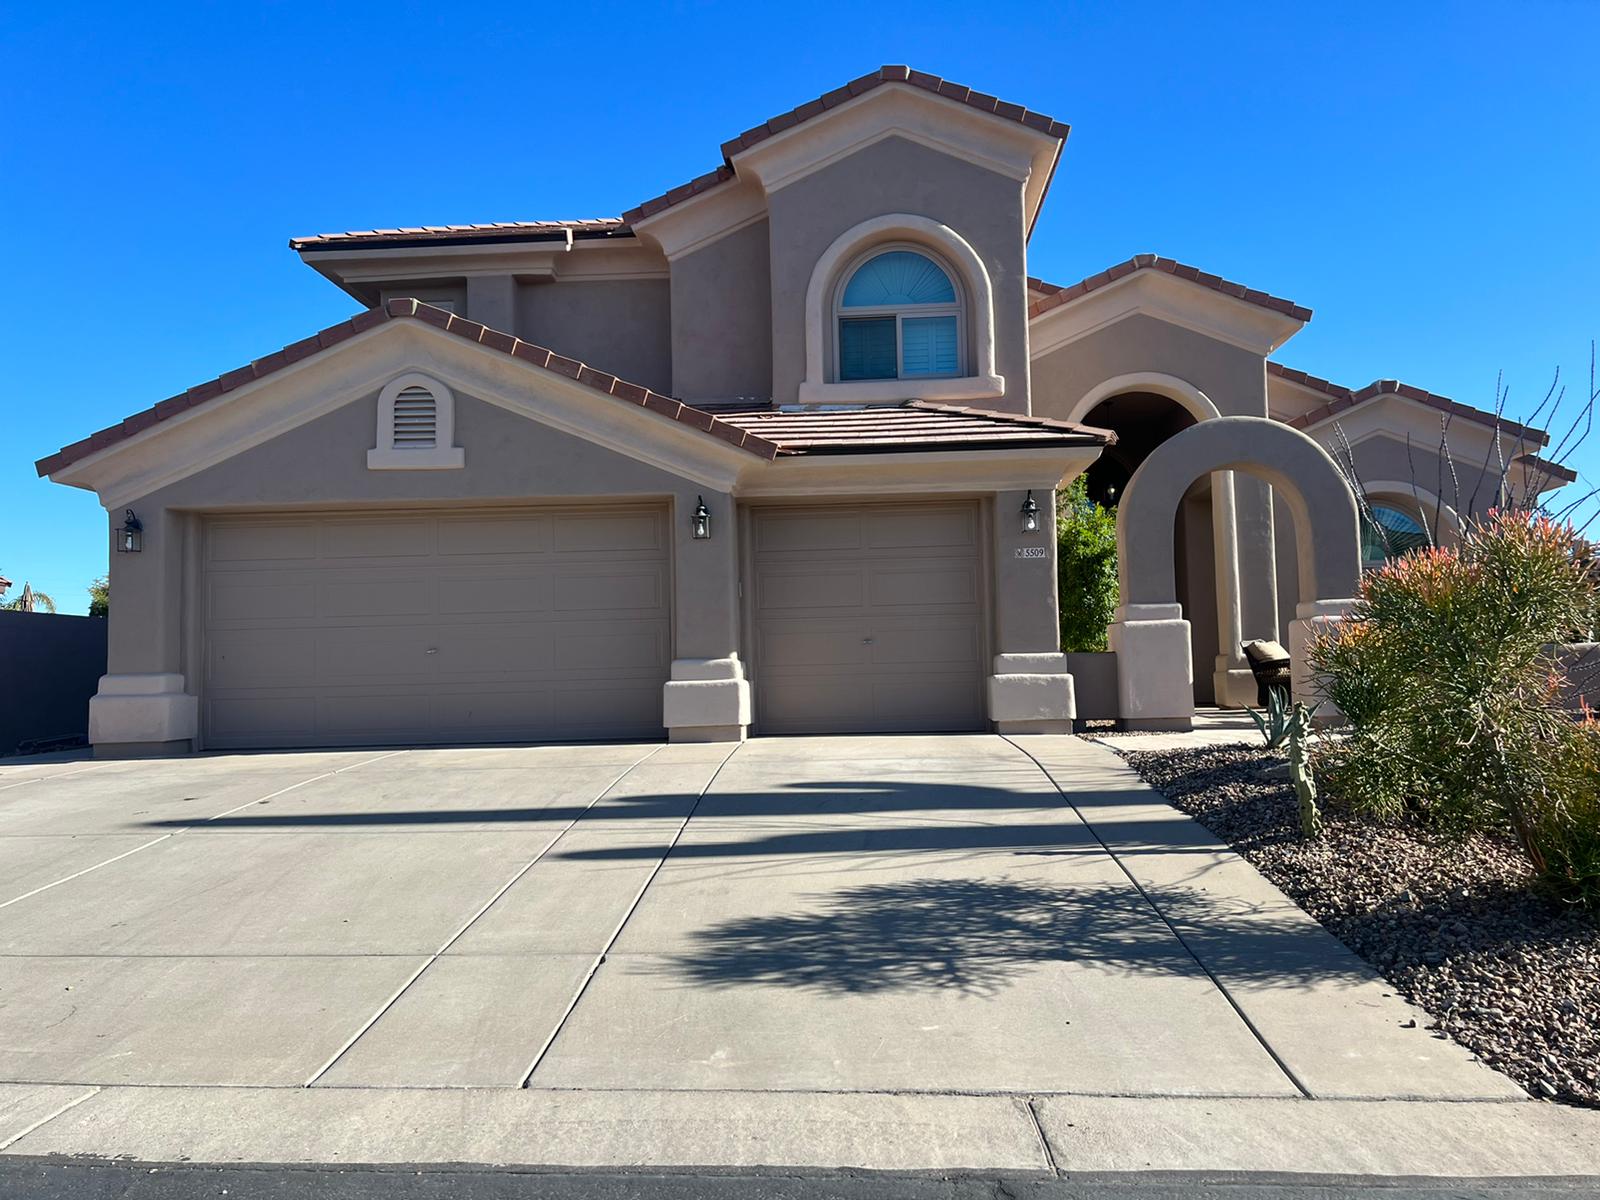 A desert home with a garage, driveway, and tile re-roofing in Cave Creek.